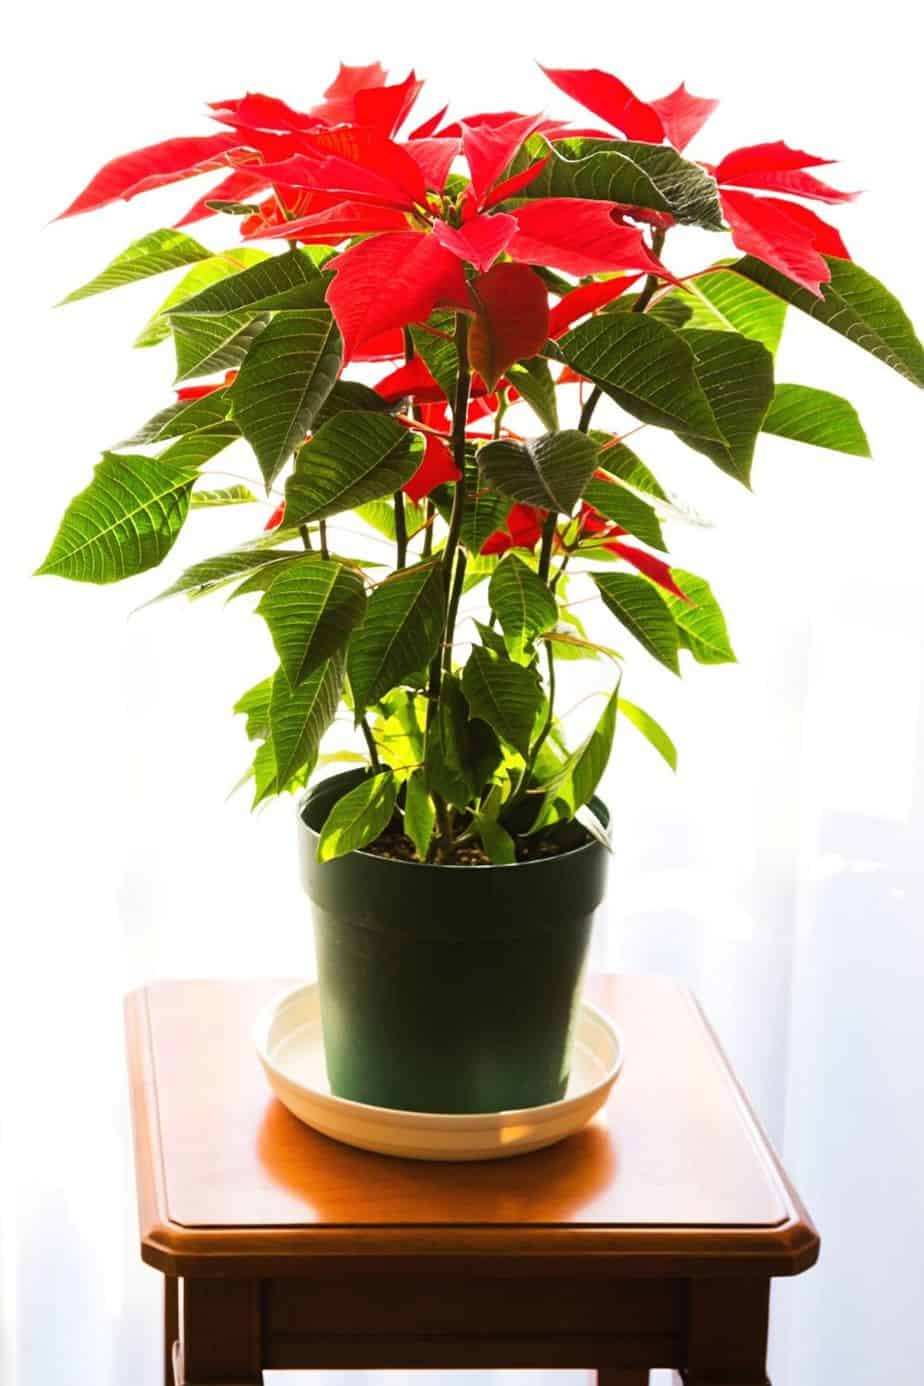 Despite being a popular plant during the Christmas season, Poinsettia isn't ideal to be grown when you have cats at home